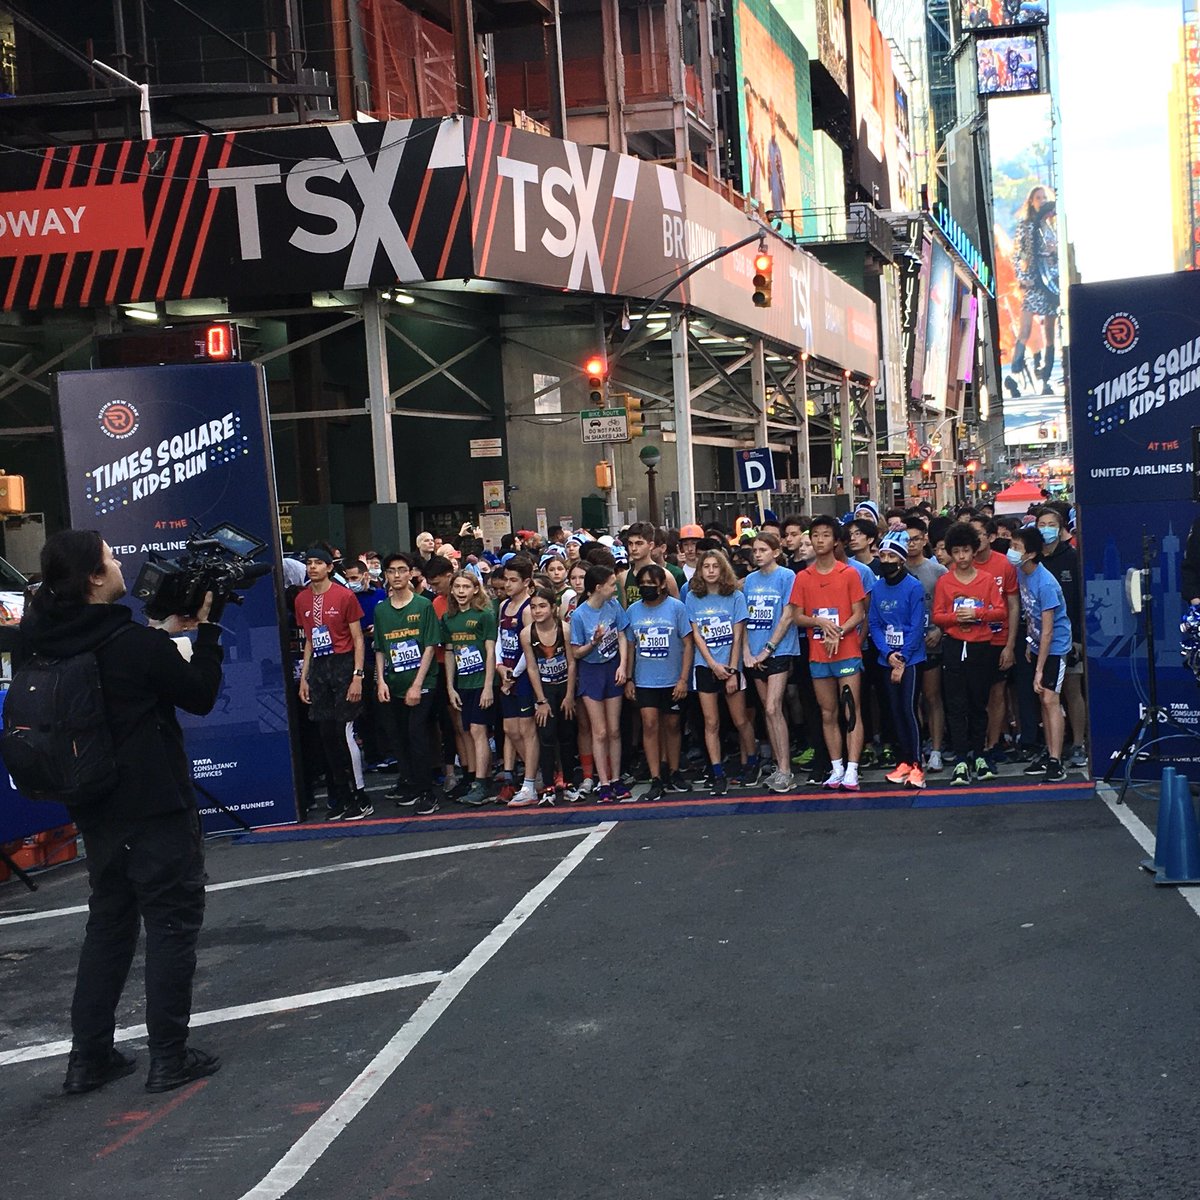 #Cheering hundreds of the #RisingNYRR in #TimesSquare, as part of the #UnitedNYCHalf on Sunday! #NYRR #GothamCheer #Inspire #NYCHalf #Youth #NYC #iloveny